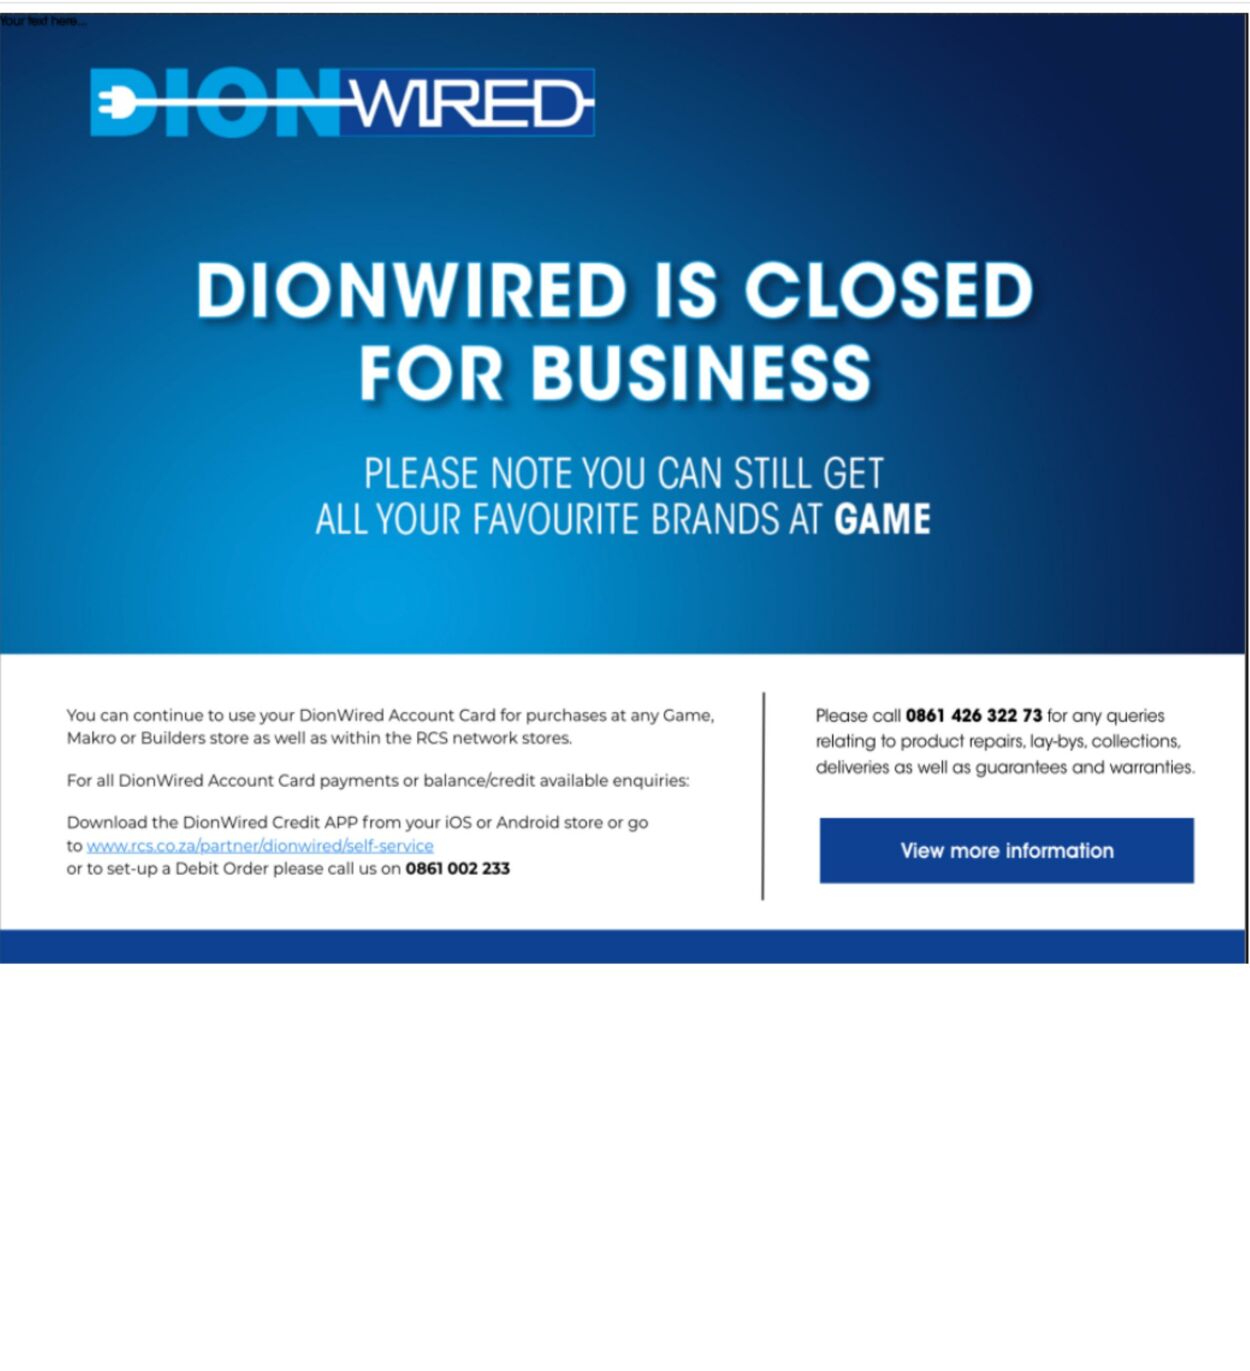 Special Dion Wired 13.04.2022 - 30.04.2022